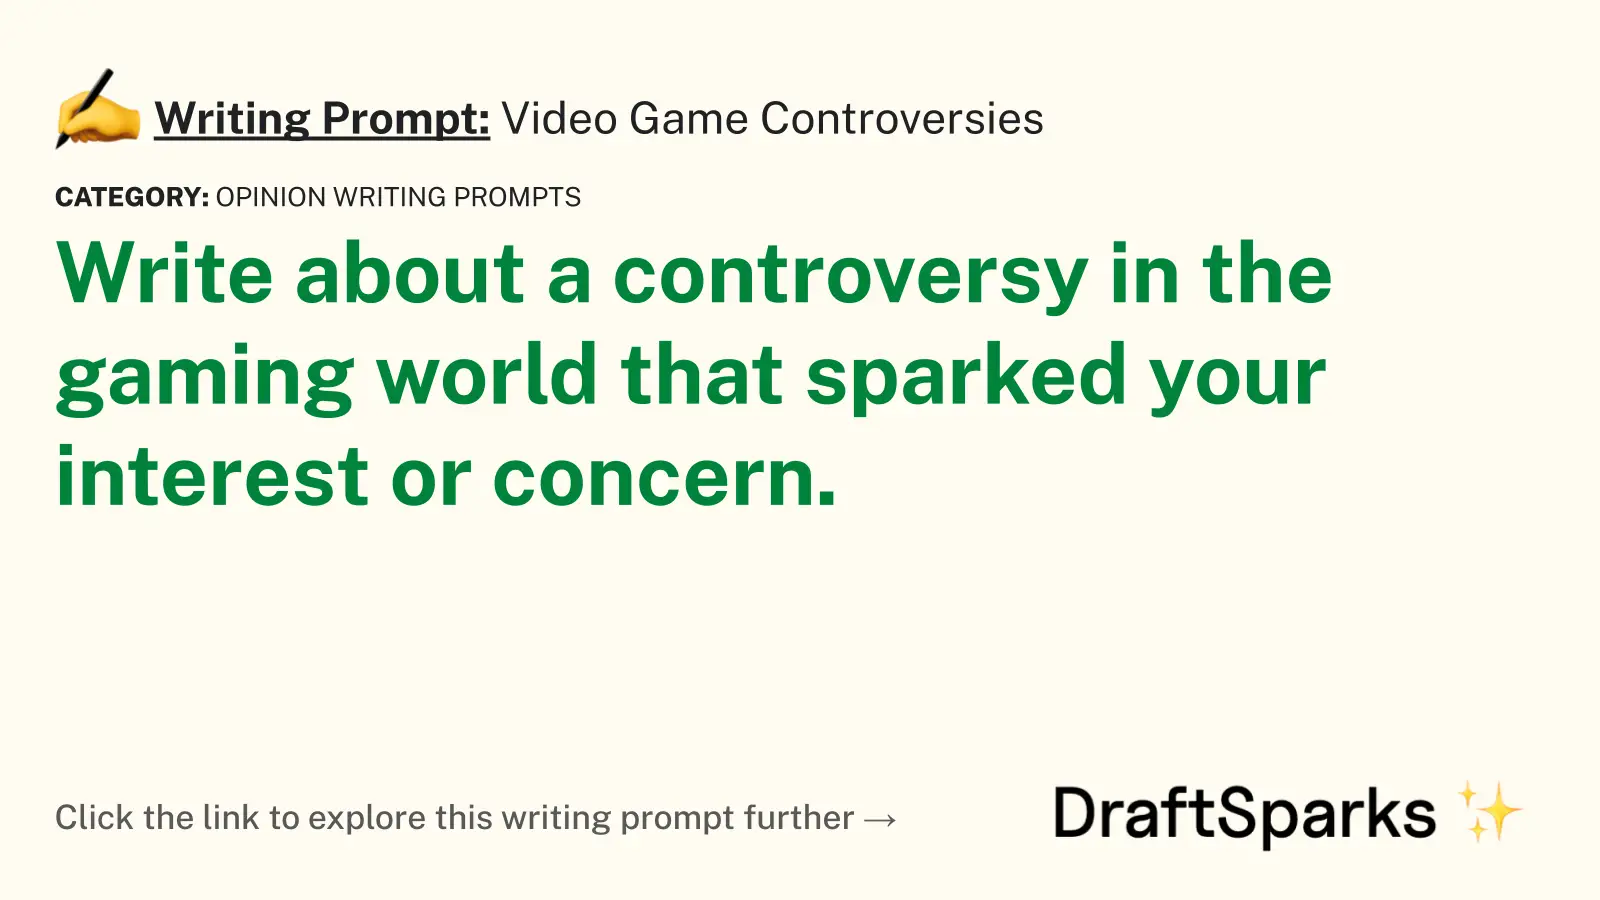 Video Game Controversies